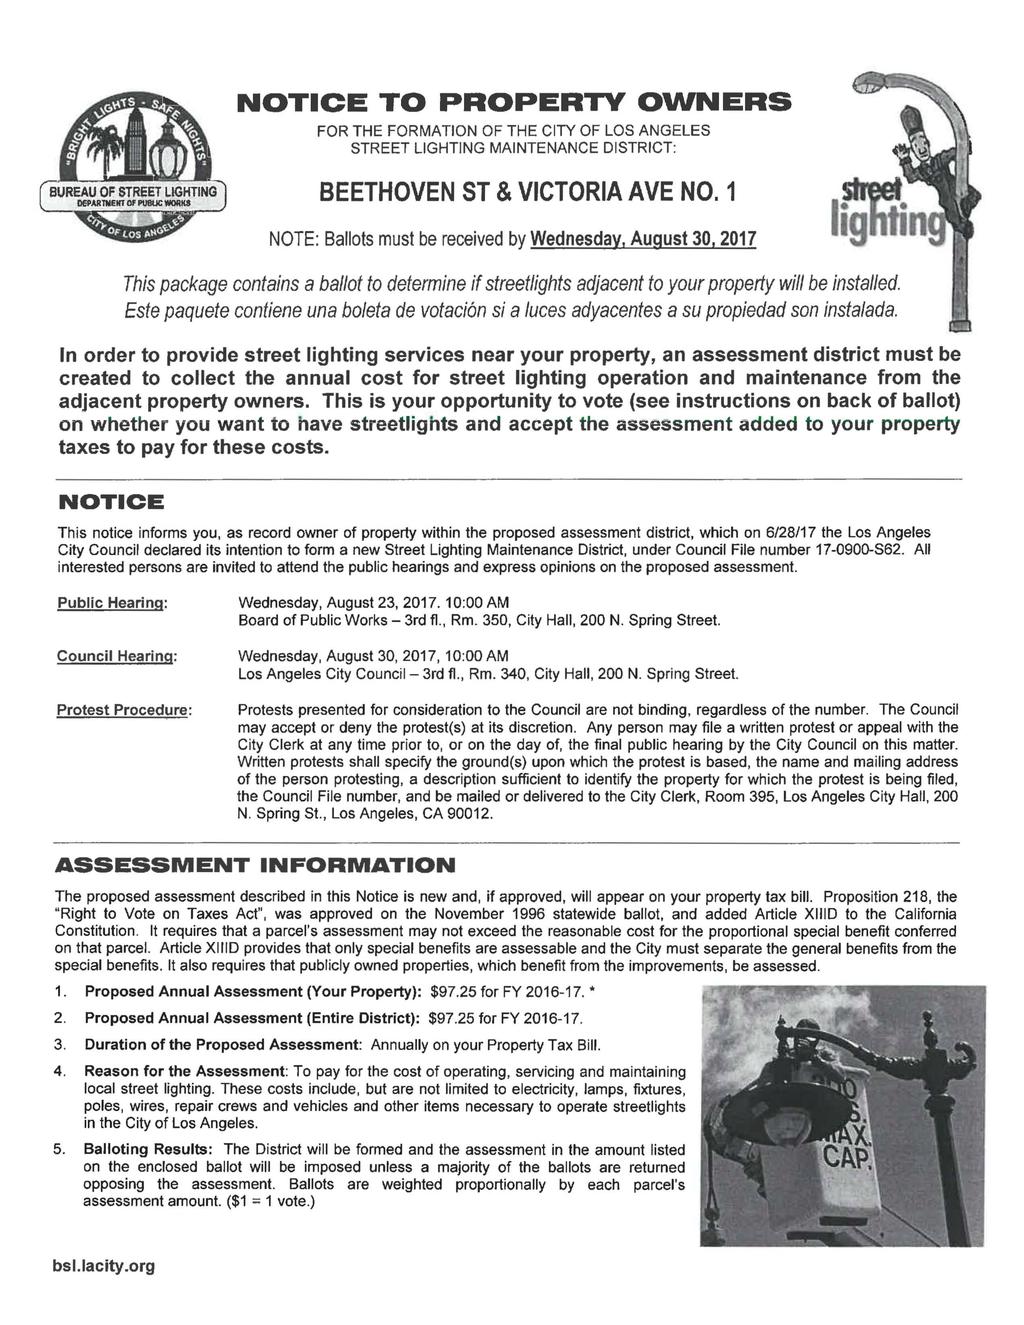 NOTICE TO PROPERTY OWNERS FOR THE FORMATION OF THE CITY OF LOS ANGELES STREET LIGHTING MAINTENANCE DISTRICT: fbureau OF STREET LIGHTING") ^ DEPARTMENT OF PU8UC WORKS J l BEETHOVEN ST & VICTORIA AVE